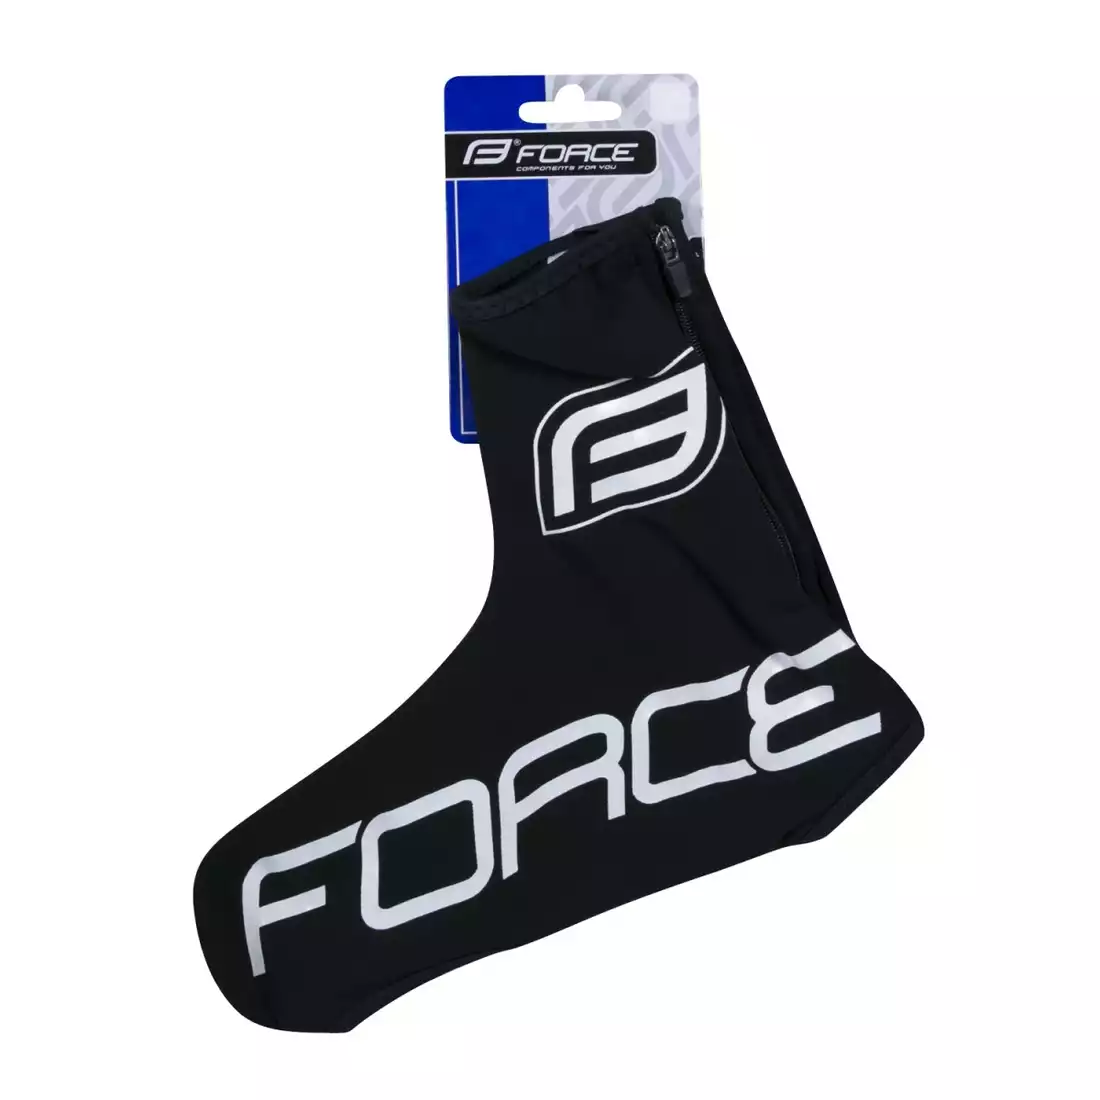 FORCE LYCRA TERMO insulated road boot protectors, black 905920